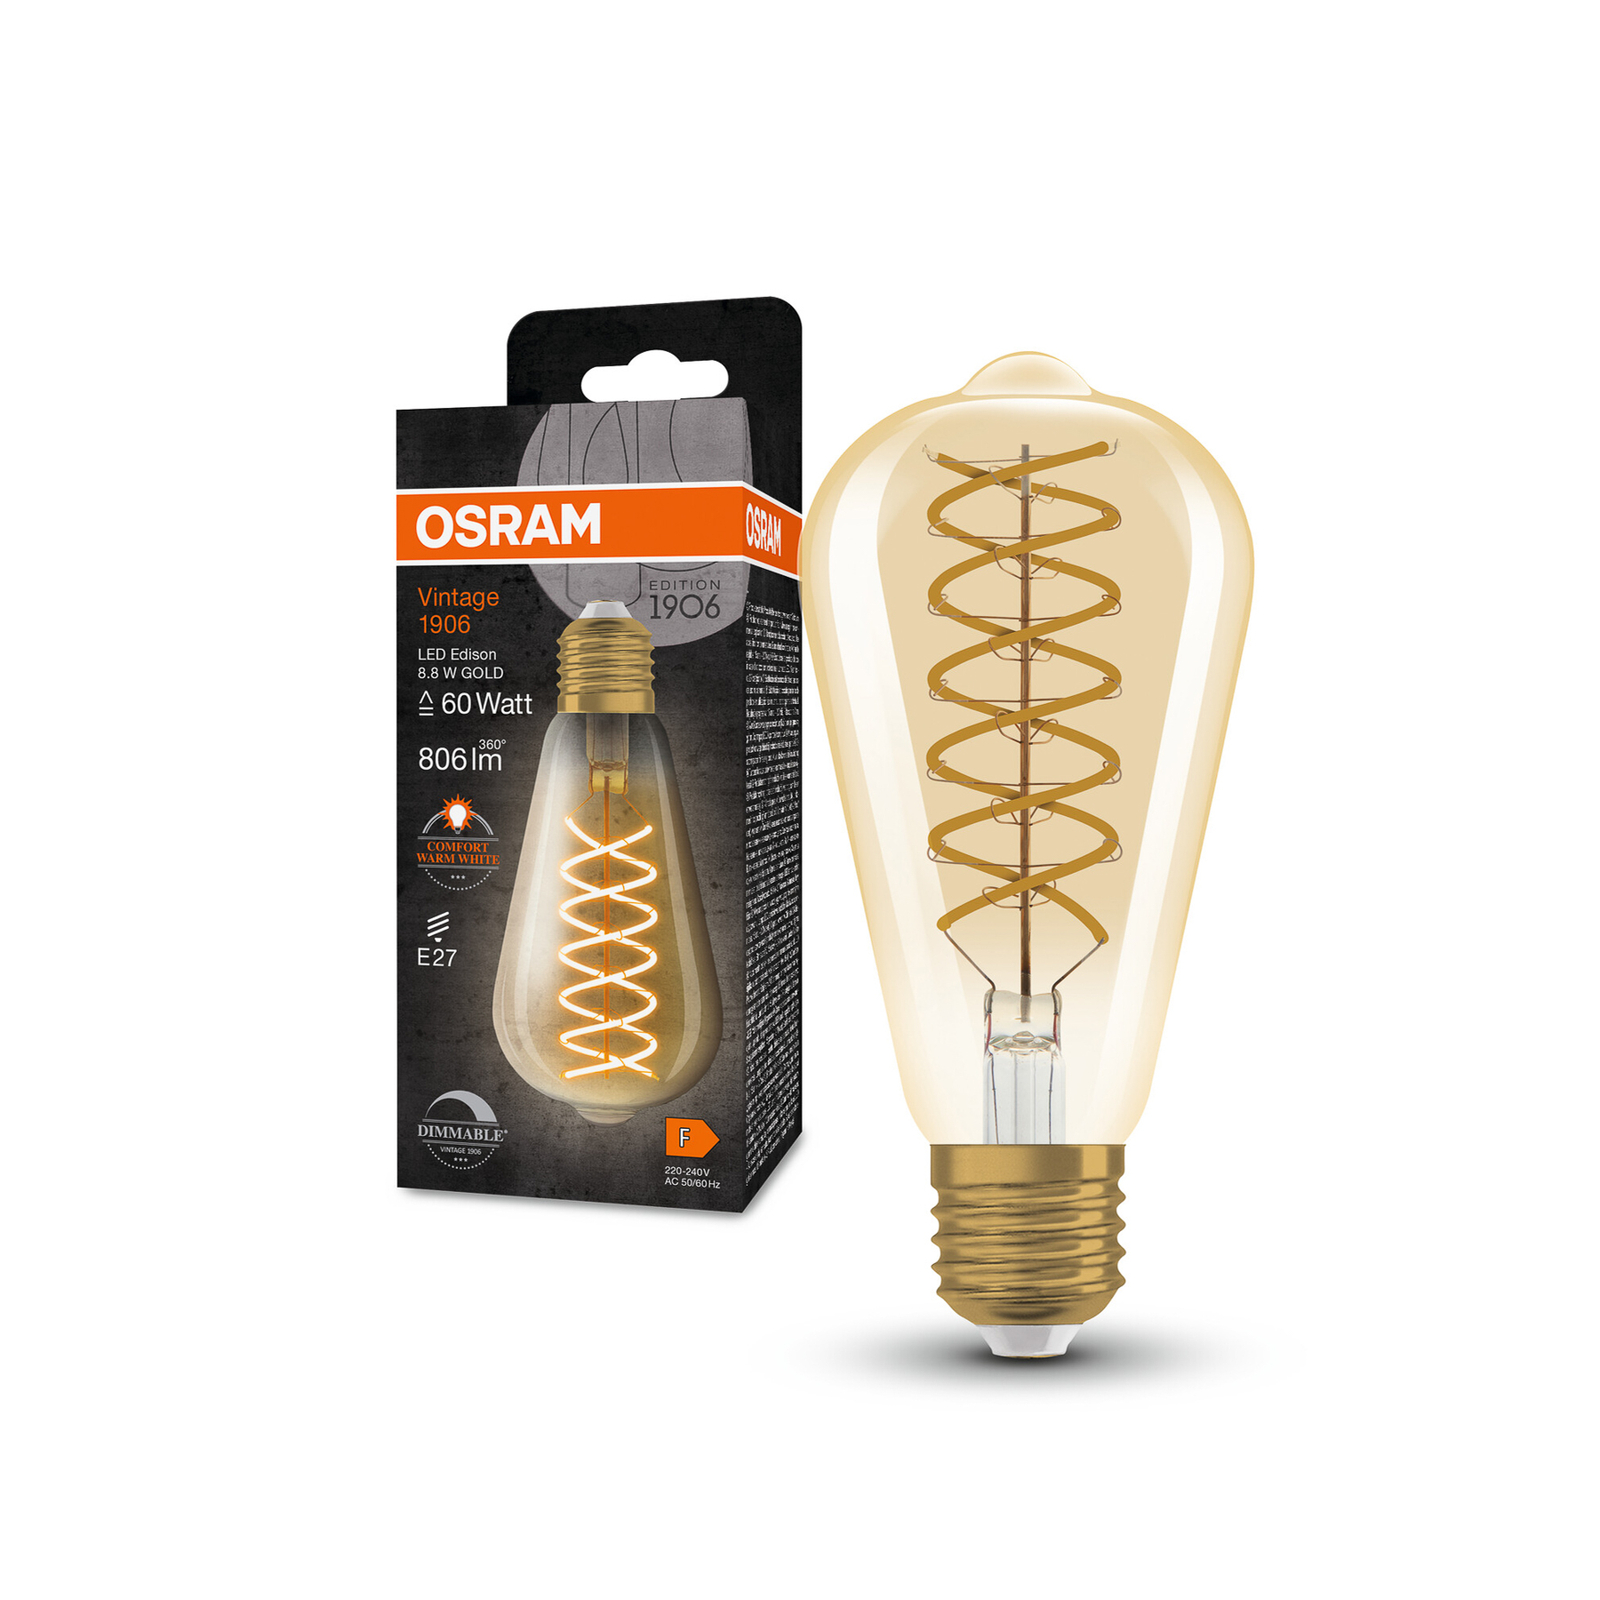 OSRAM LED Vintage 1906 Edison, gold, E27, 8.8 W, 824, dimmable.